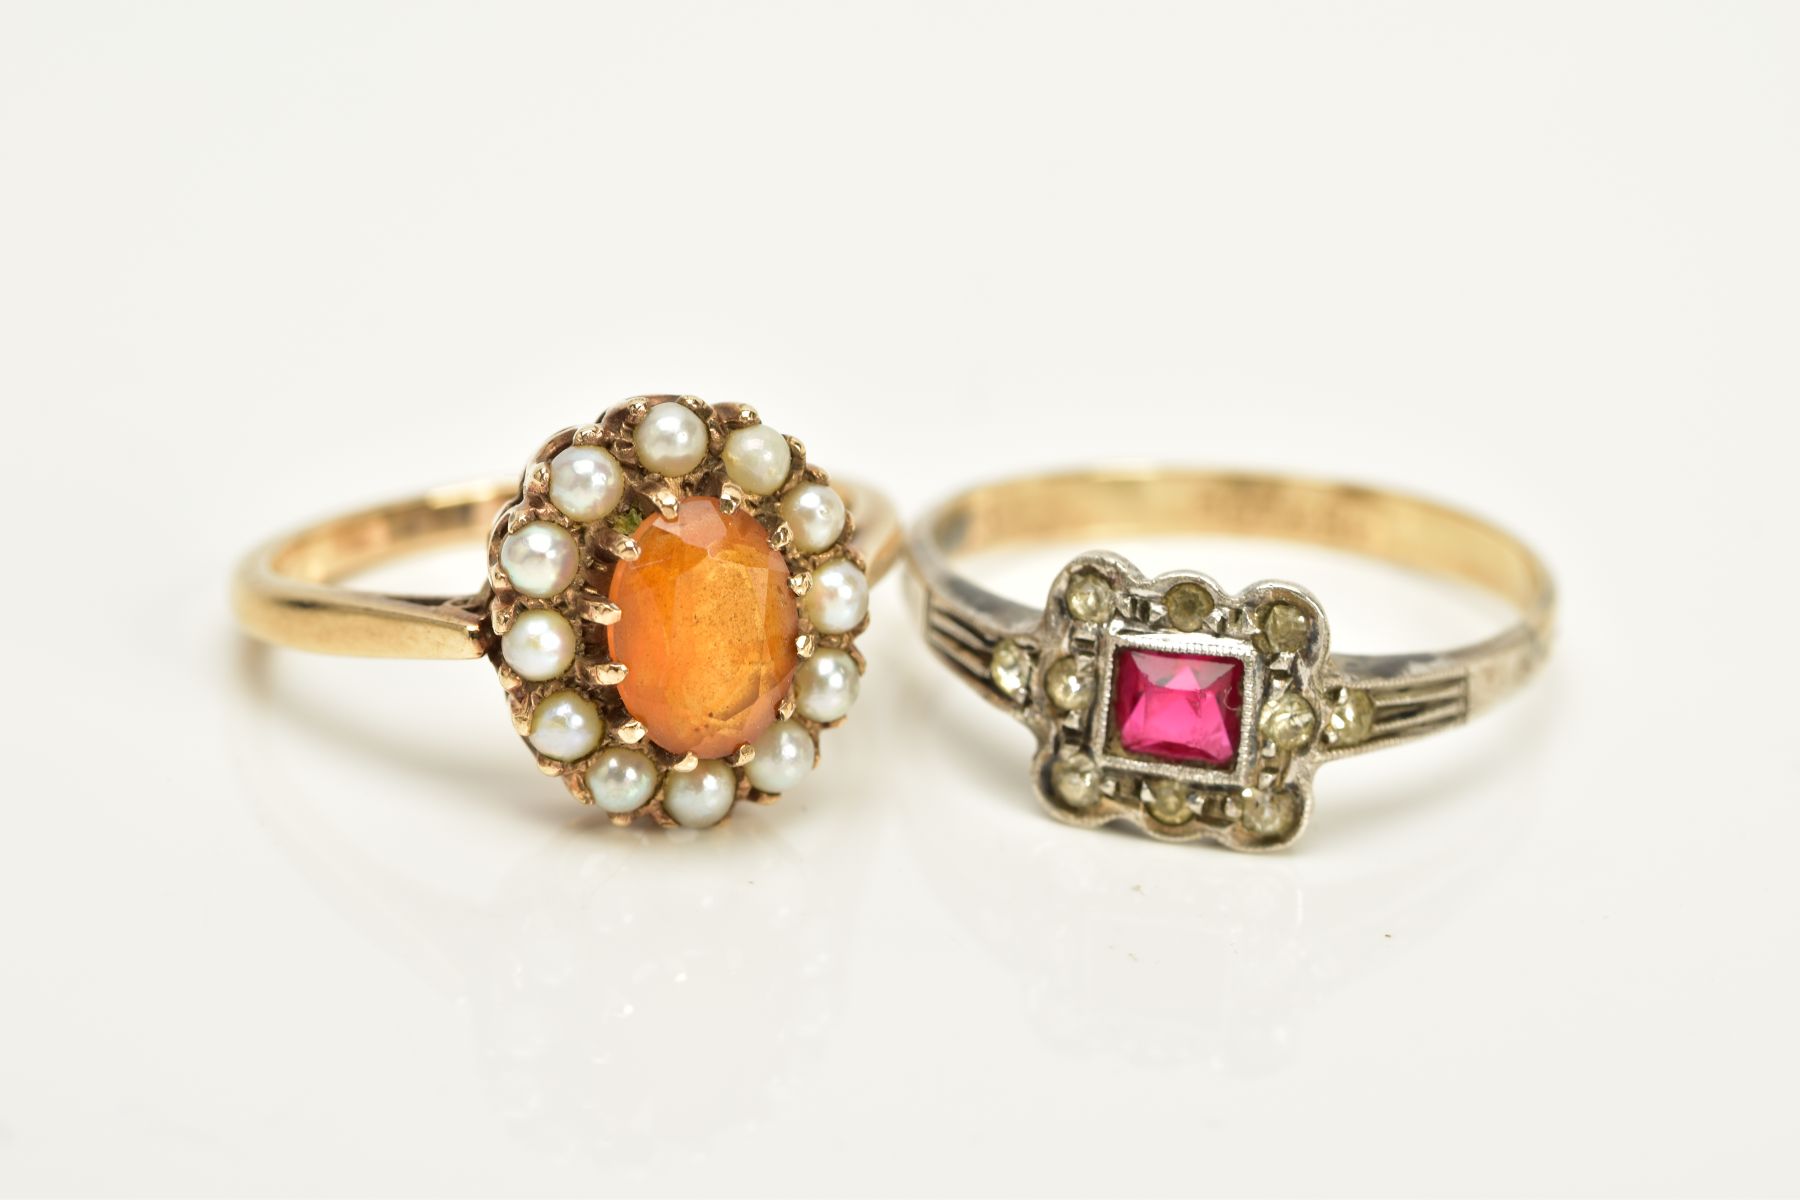 TWO CLUSTER RINGS, the first designed with a central oval cut orange stone assessed as citrine,